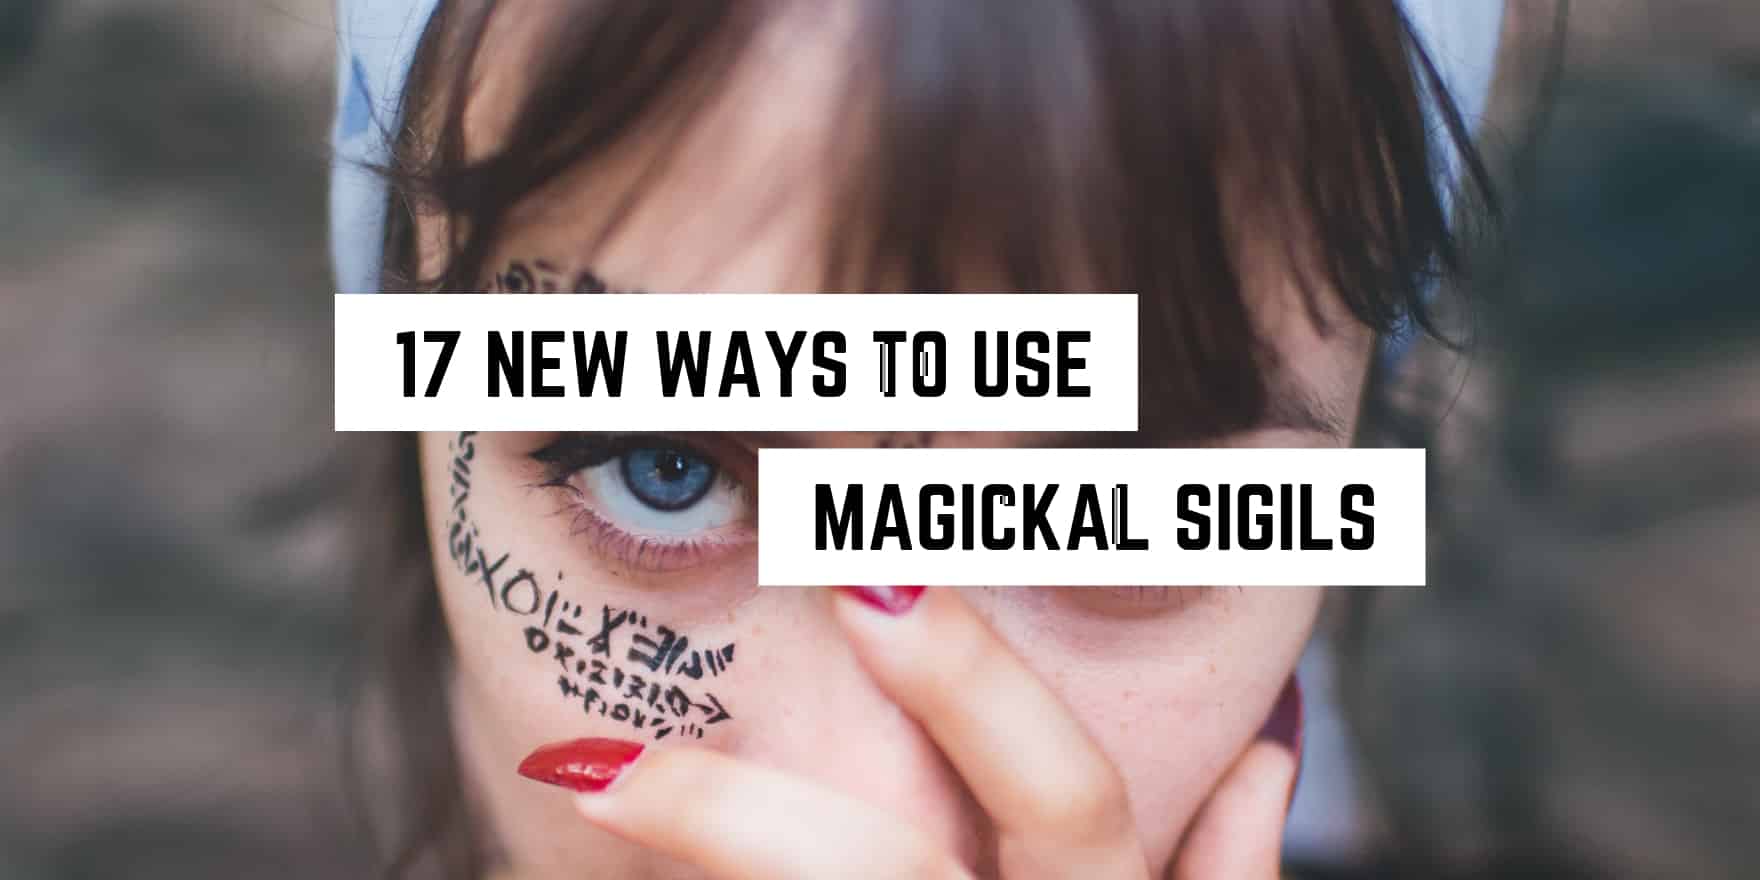 Exploring the mystical: unlock enchantments with 17 witchy applications for magical sigils.